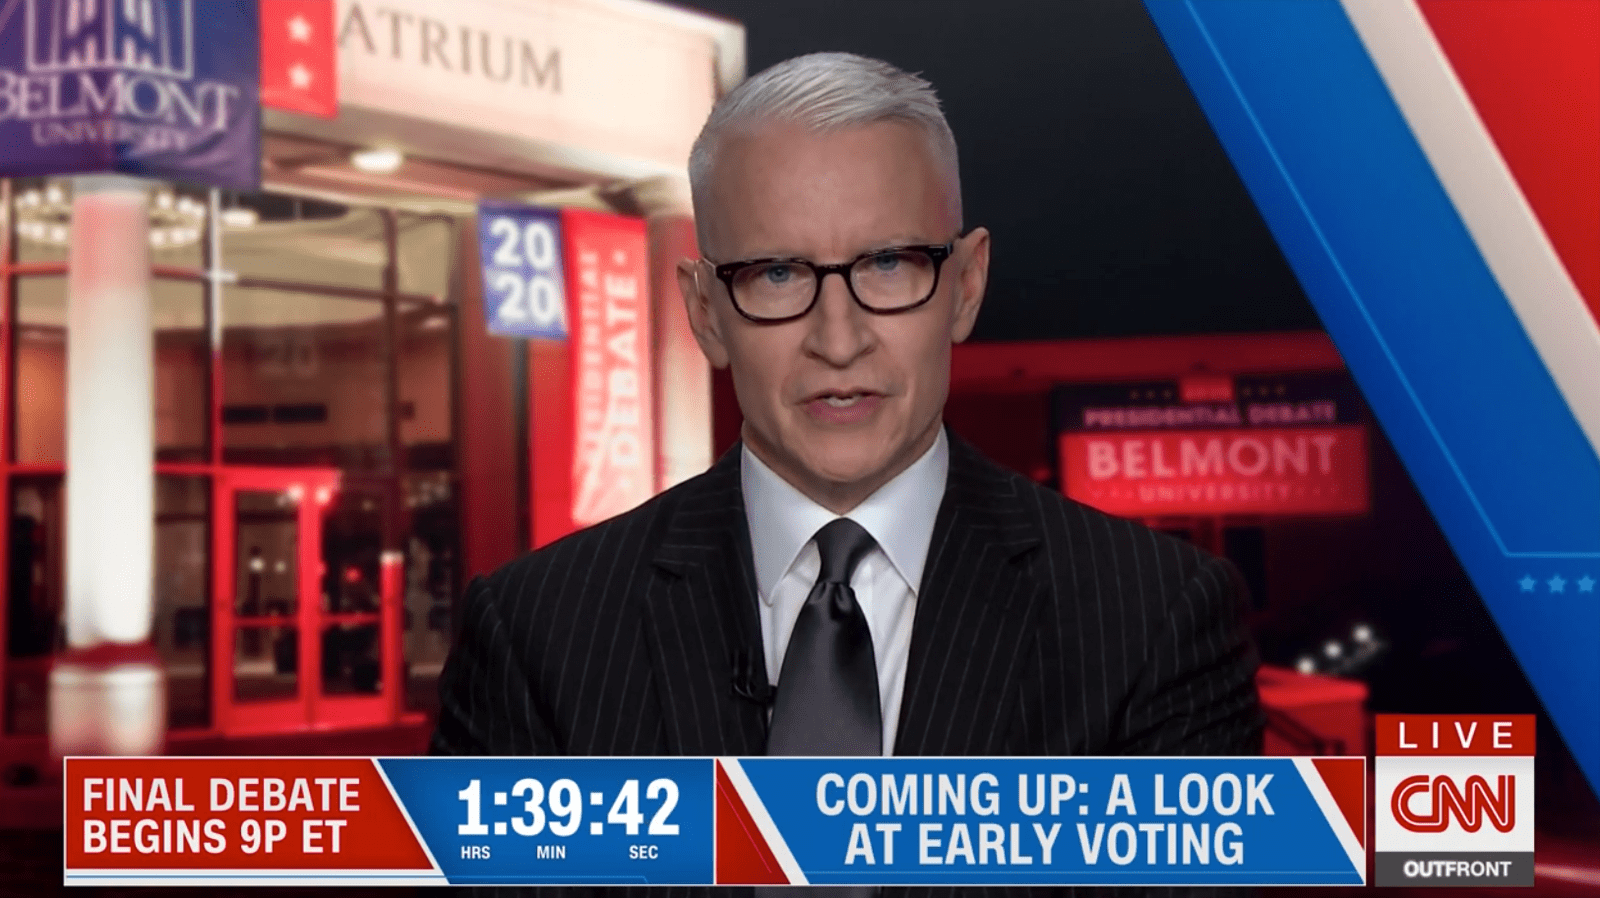 A man, Anderson Cooper, reports for CNN in front of Belmont's Maddox Grand Atrium, illuminated with red and blue lights and decorated with Belmont and Debate posters.